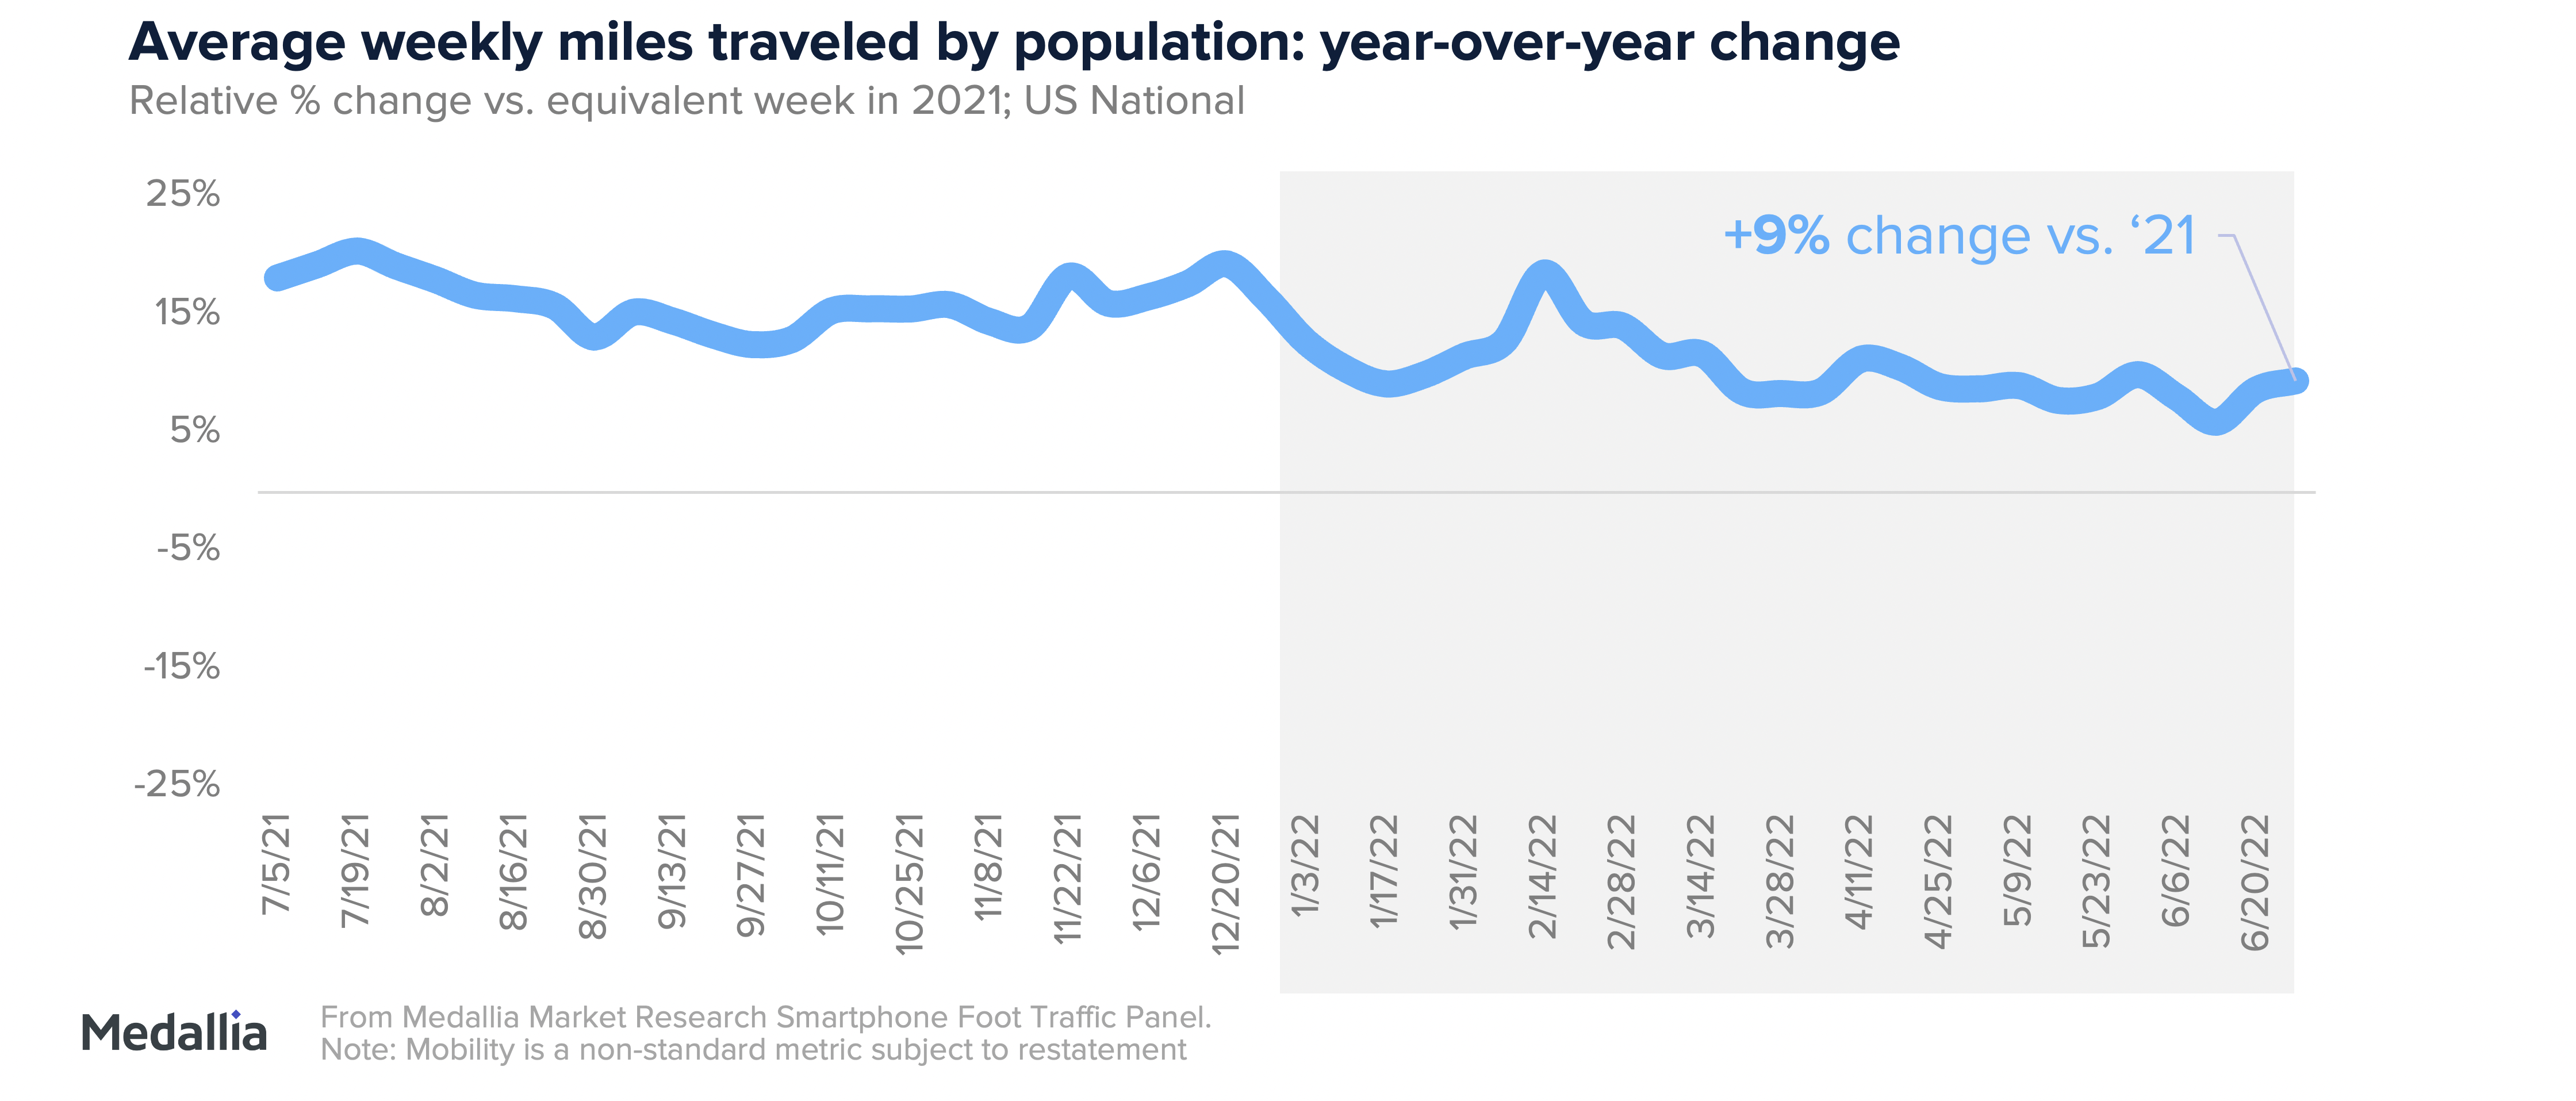 Average weekly miles travels by population, year over year change. Shows a slight dip from 2021 to 2022.